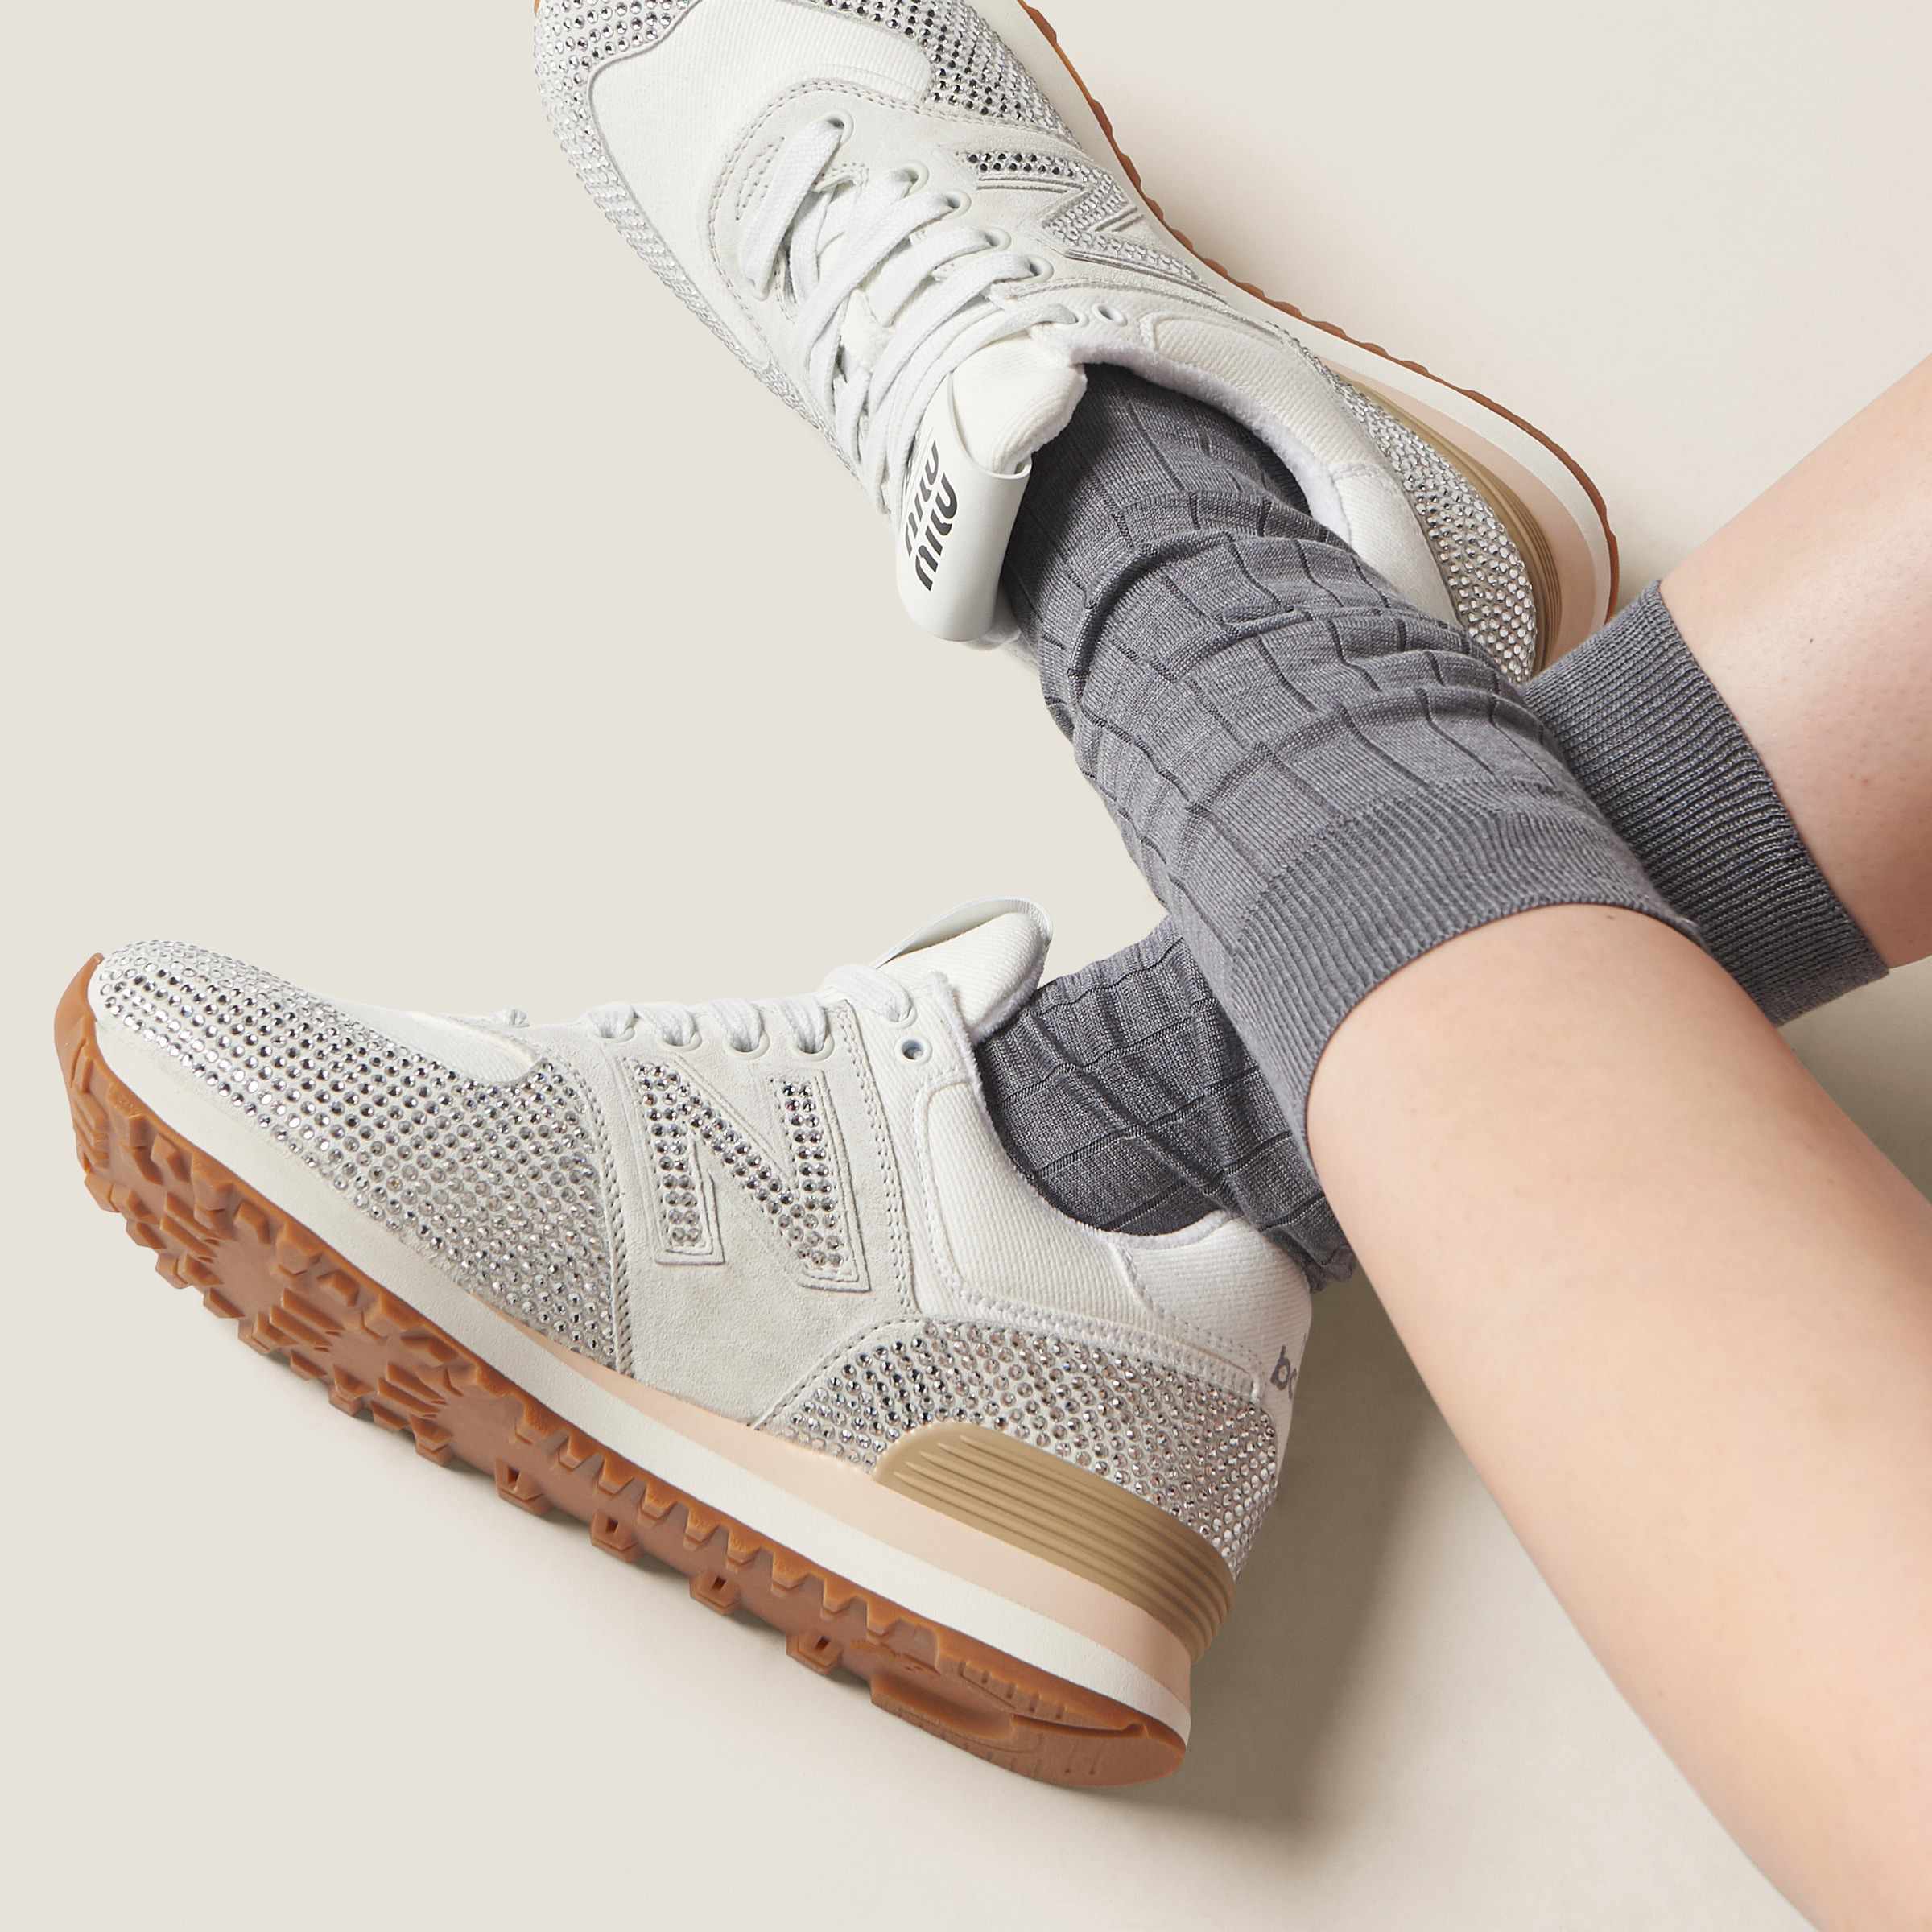 Miu Miu's New Balance 574 sneaker in white suede & denim with crystals